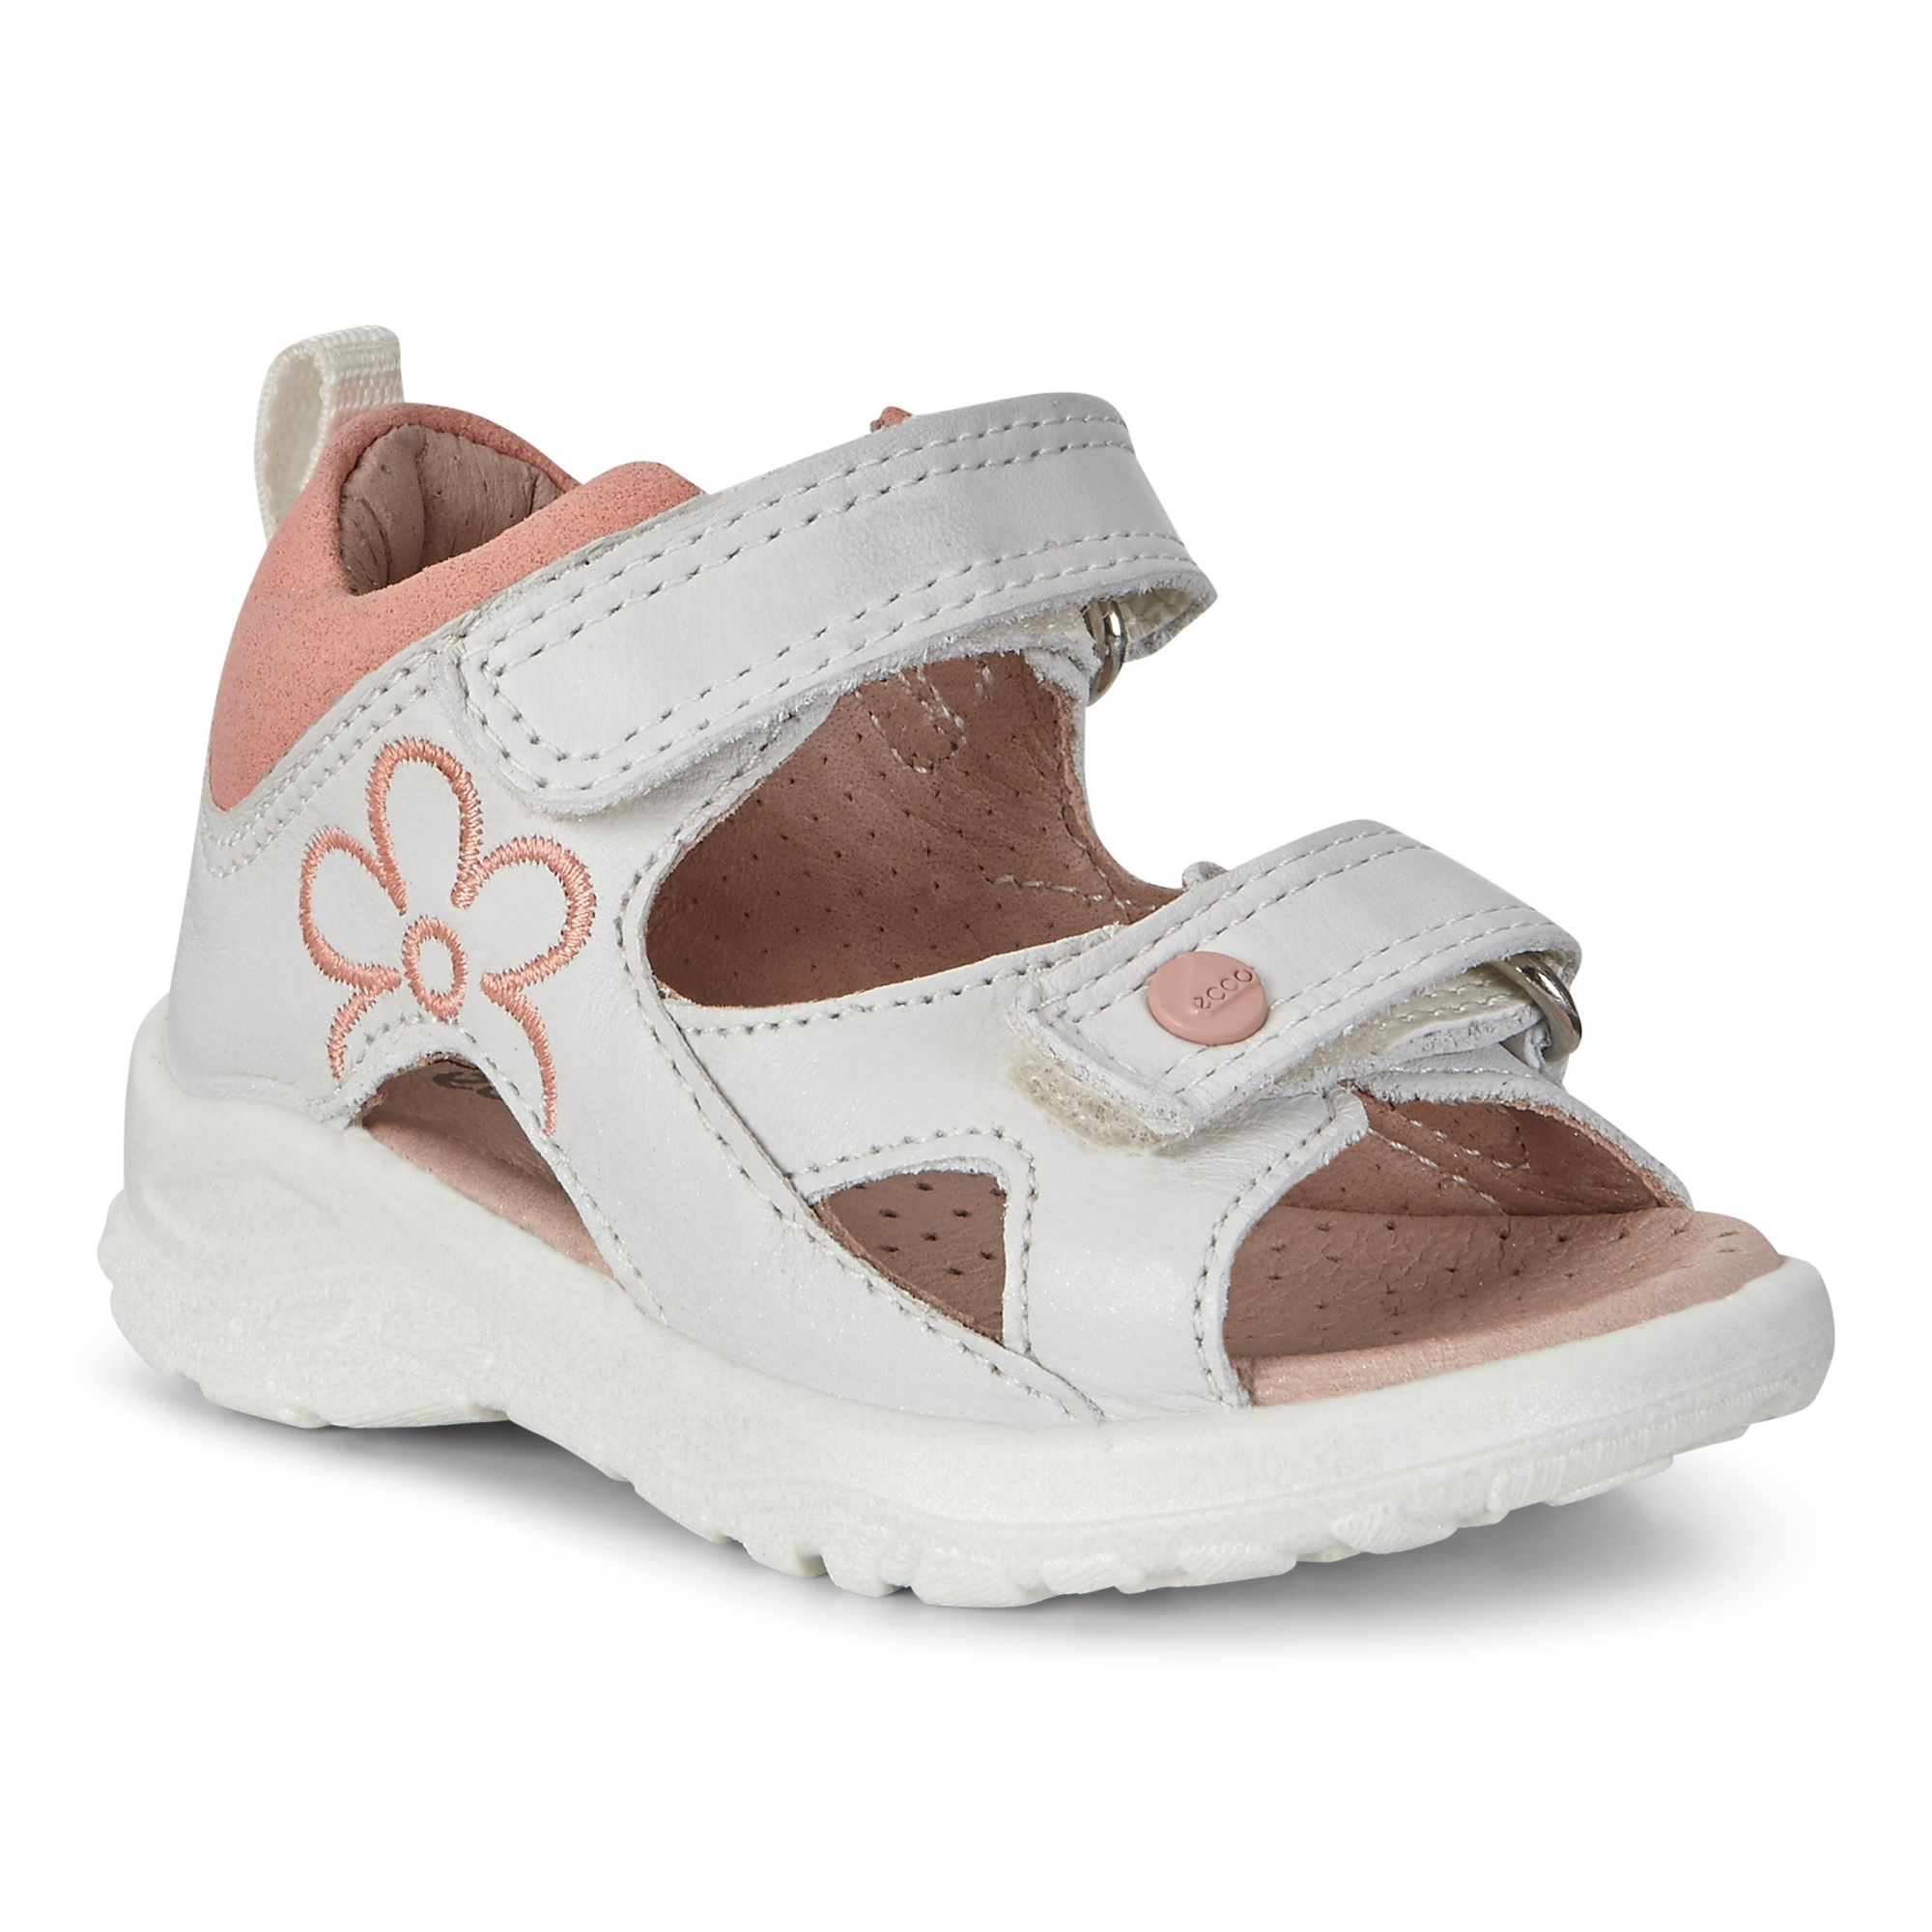 Ecco Peekaboo Infants Sandal 19 - Products - Veryk Mall - Veryk Mall, many quick response, safe your money!